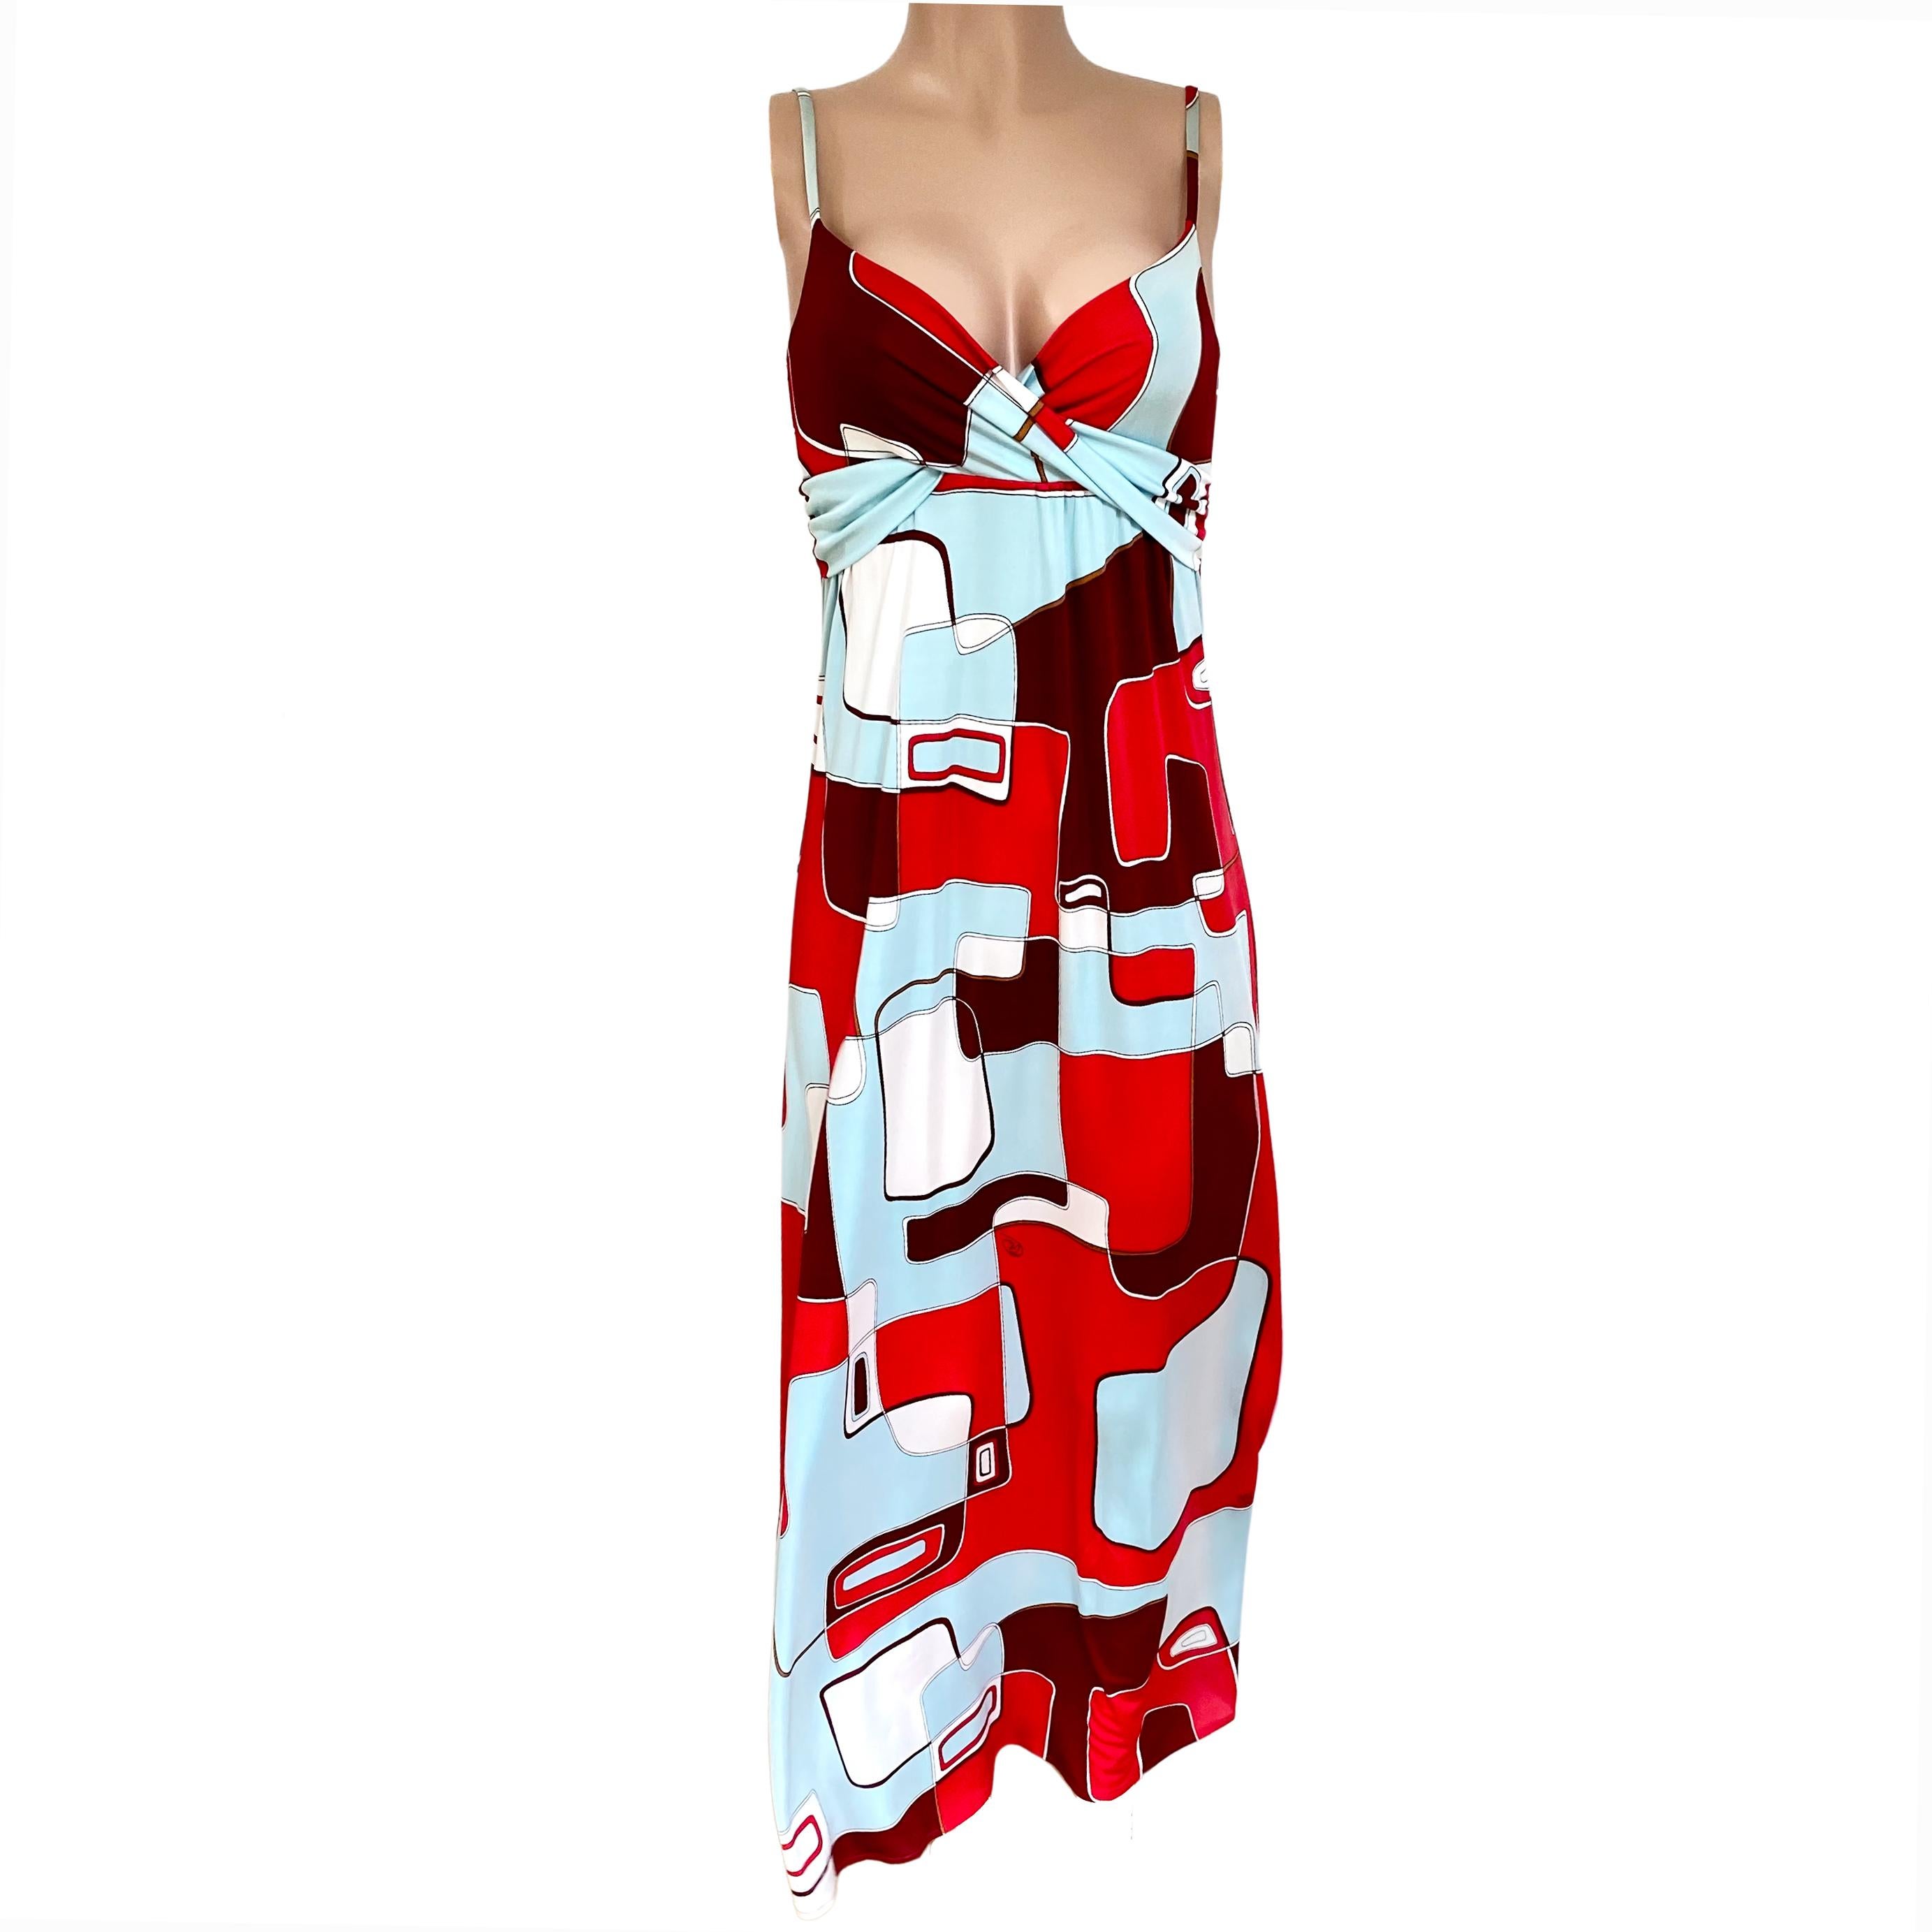 Abstract red aqua print silk jersey boho maxi dress
Original freehand signed print from Flora Kung.

To learn more about Flora the designer and read her blog on fashion anecdotes, go to her newly revamped website.
FLORA KUNG silk dresses are made in